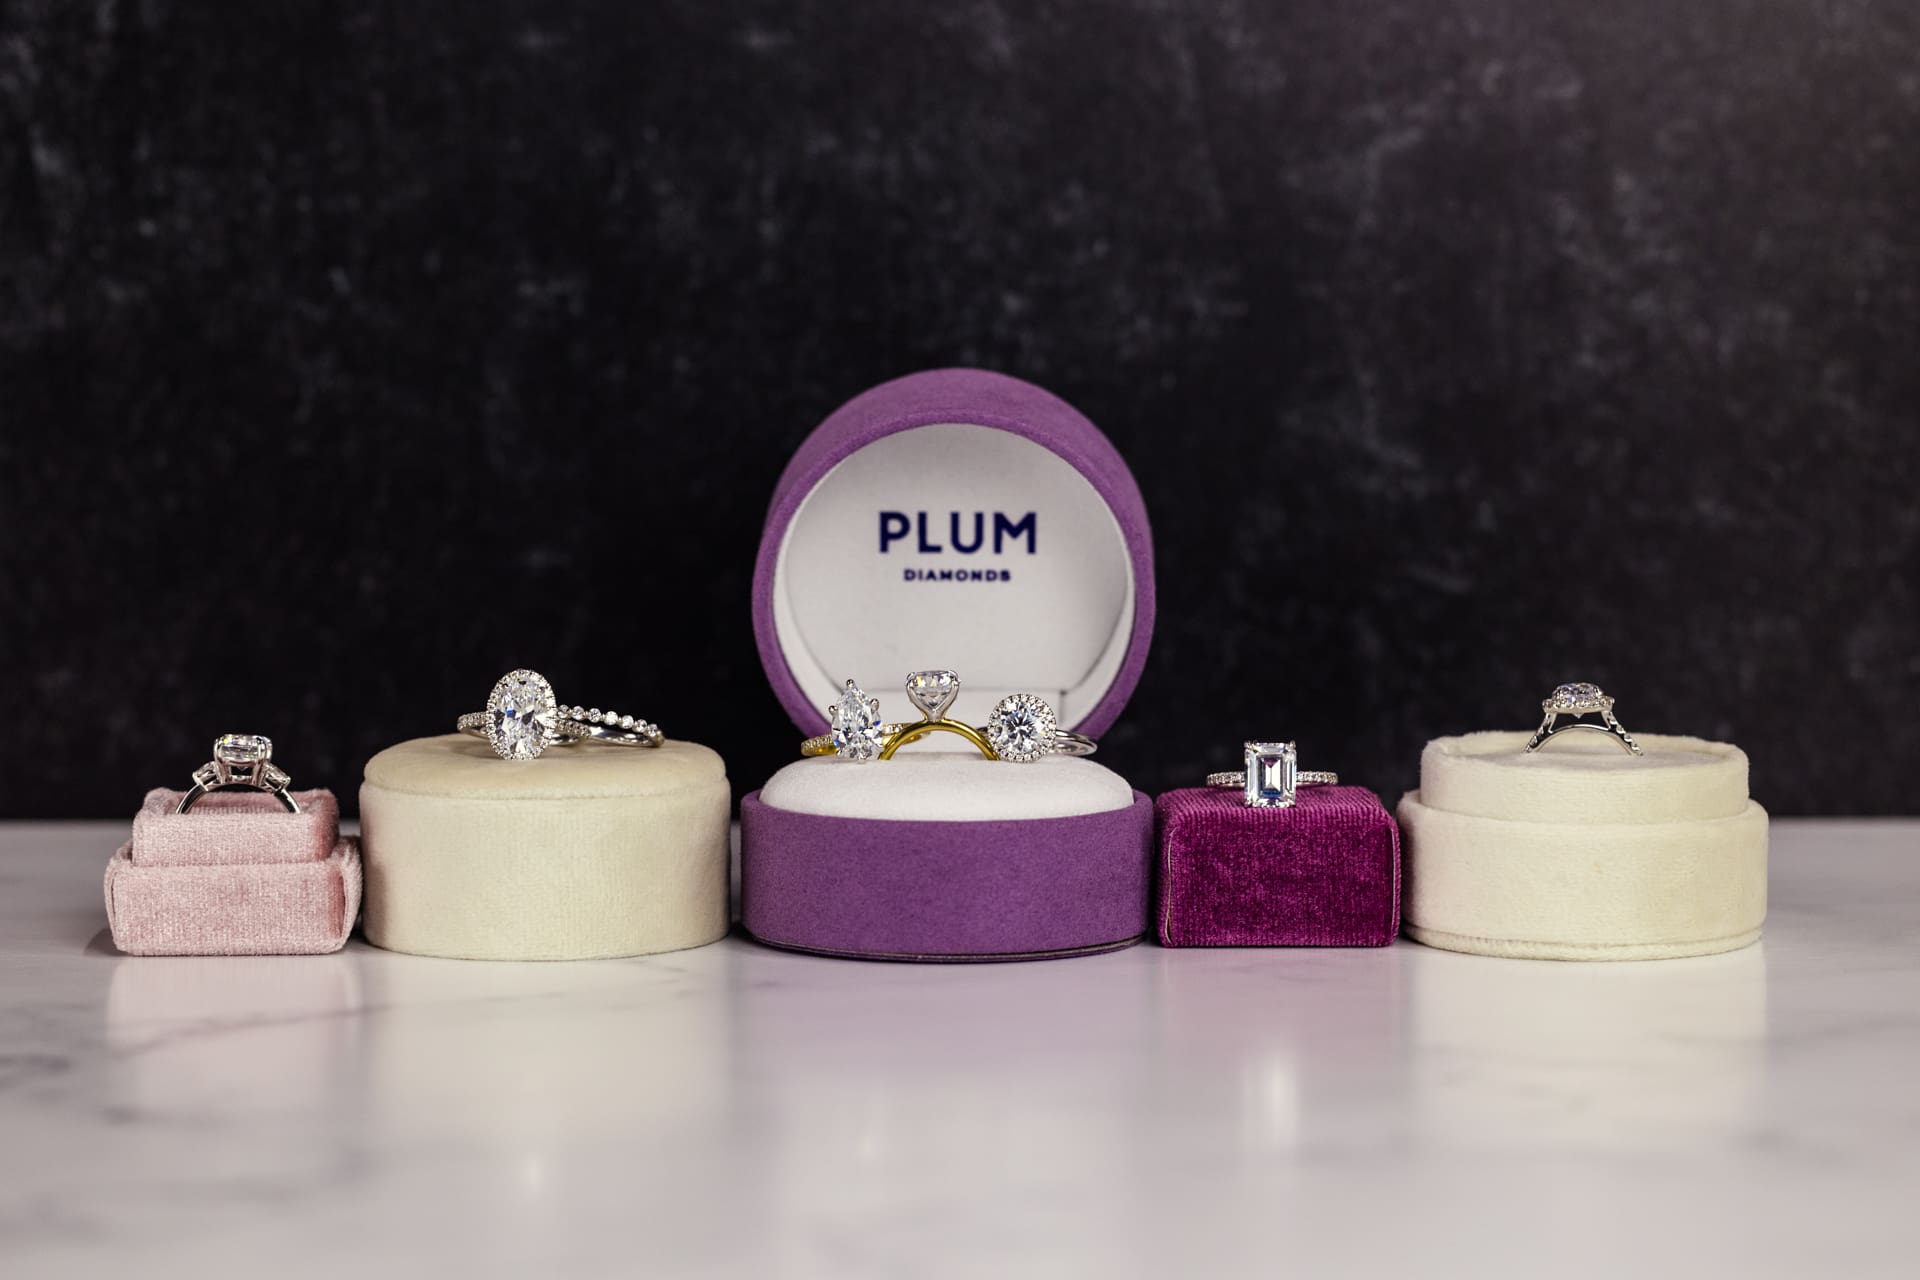 Jewelry product photography for Plum Diamonds featuring multiple diamond engagement rings in velvet boxes with black background at Chicago photography studio P&M Studio